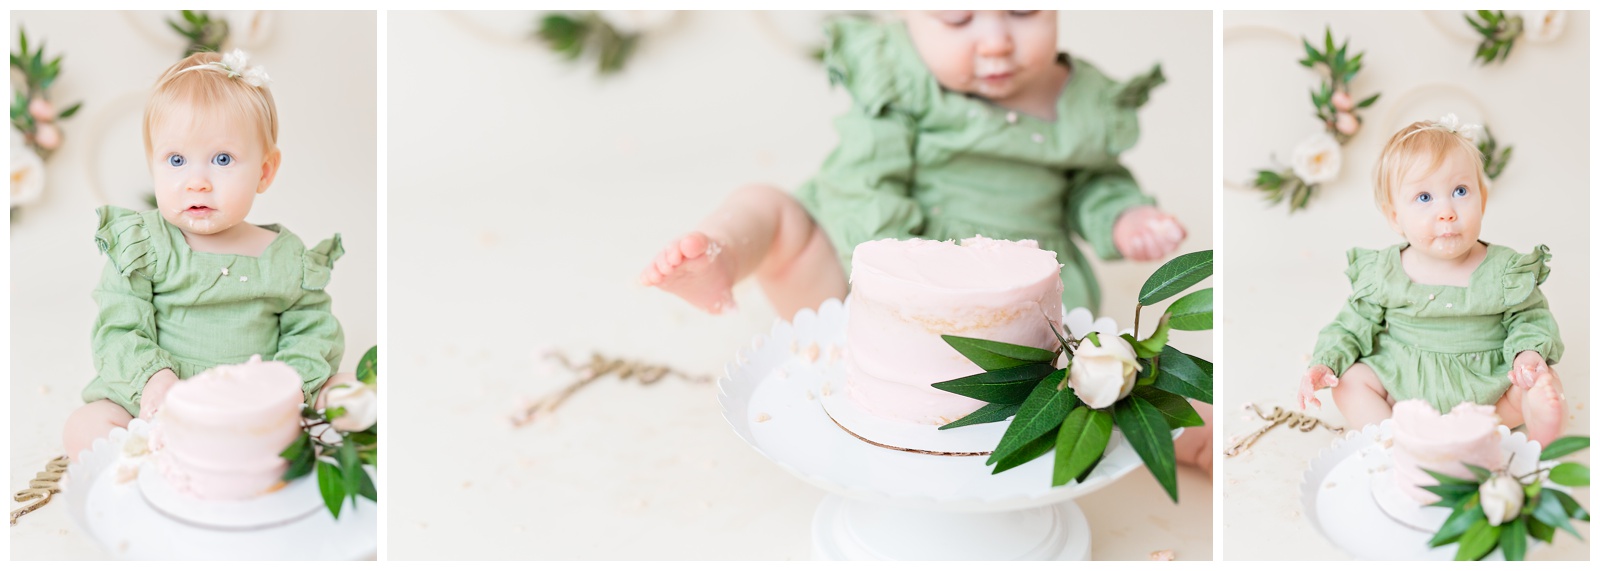 1 year old eating pink naked cake, baby toes, organic floral hoops in background, cake smash session